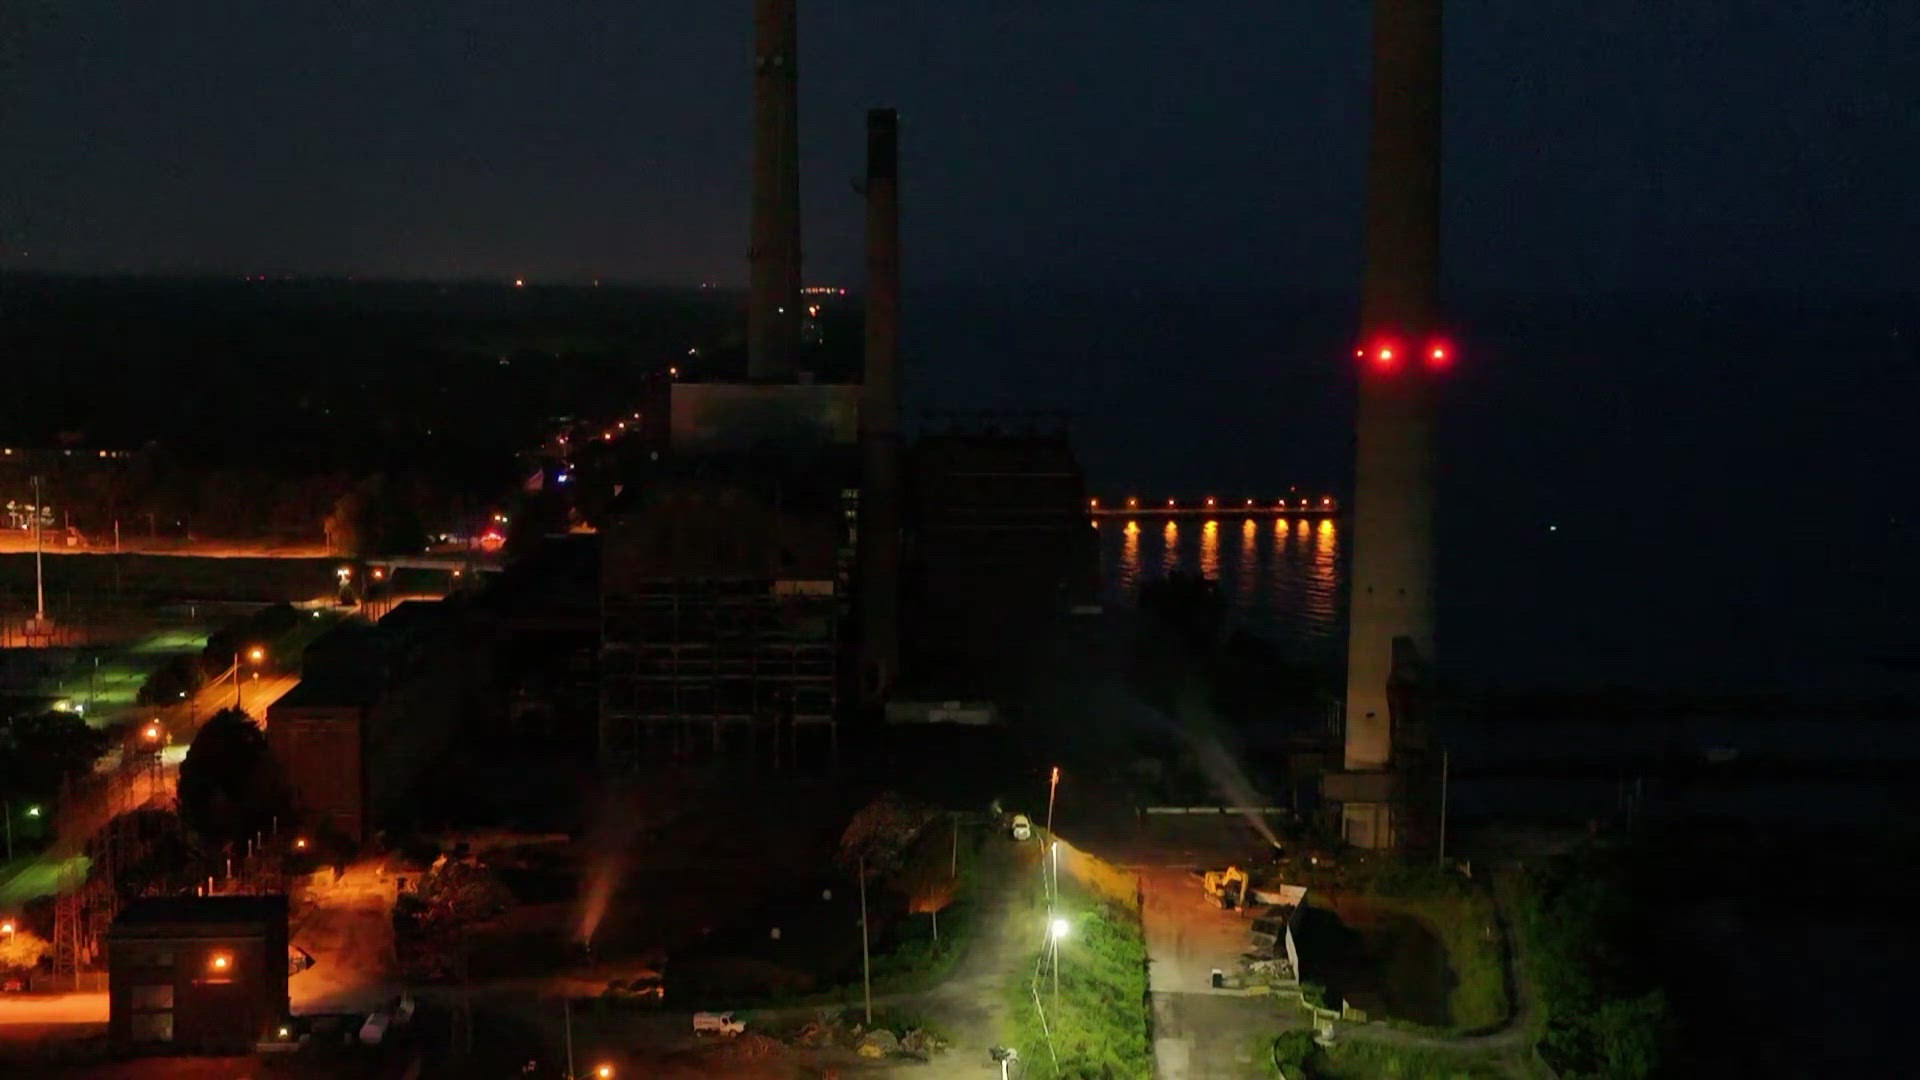 Shortly before sunrise Wednesday, an expected implosion in Avon Lake was done on portions of its historic power plant around 5:40 a.m.